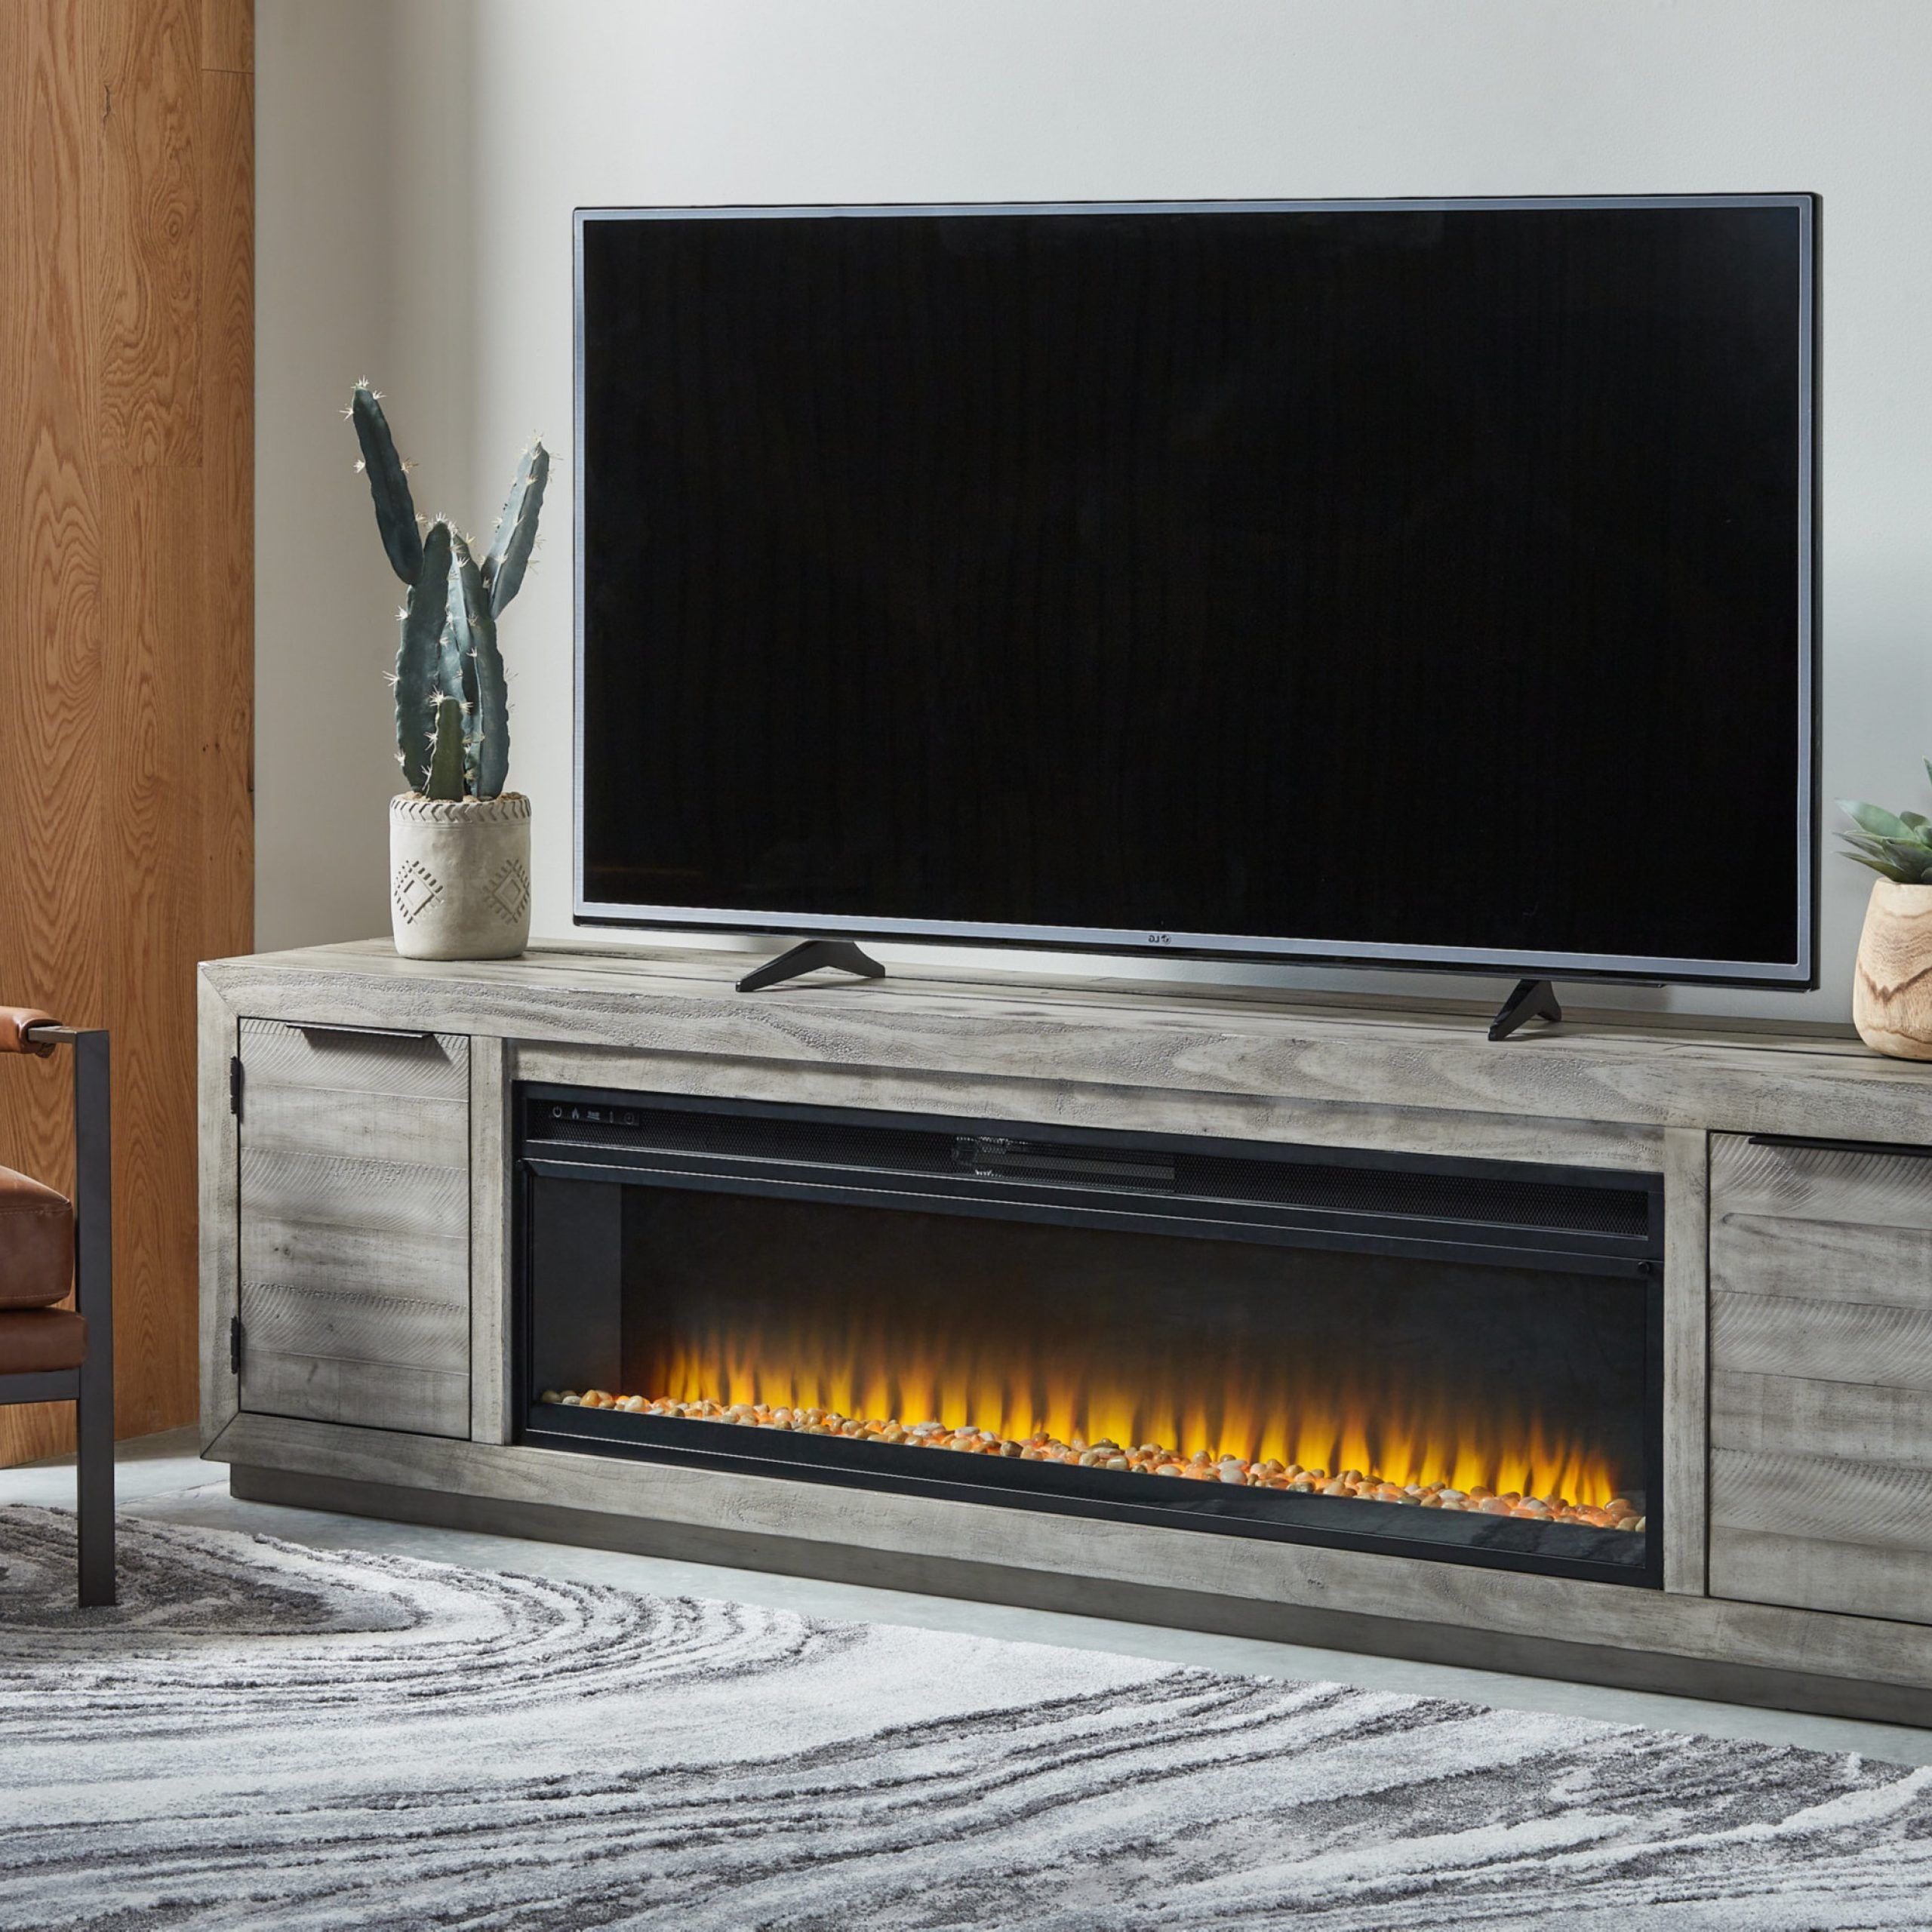 Signature Designashley Naydell Tv Stand For Tvs Up To 88" With Electric  Fireplace Included & Reviews | Wayfair For Electric Fireplace Entertainment Centers (View 11 of 20)